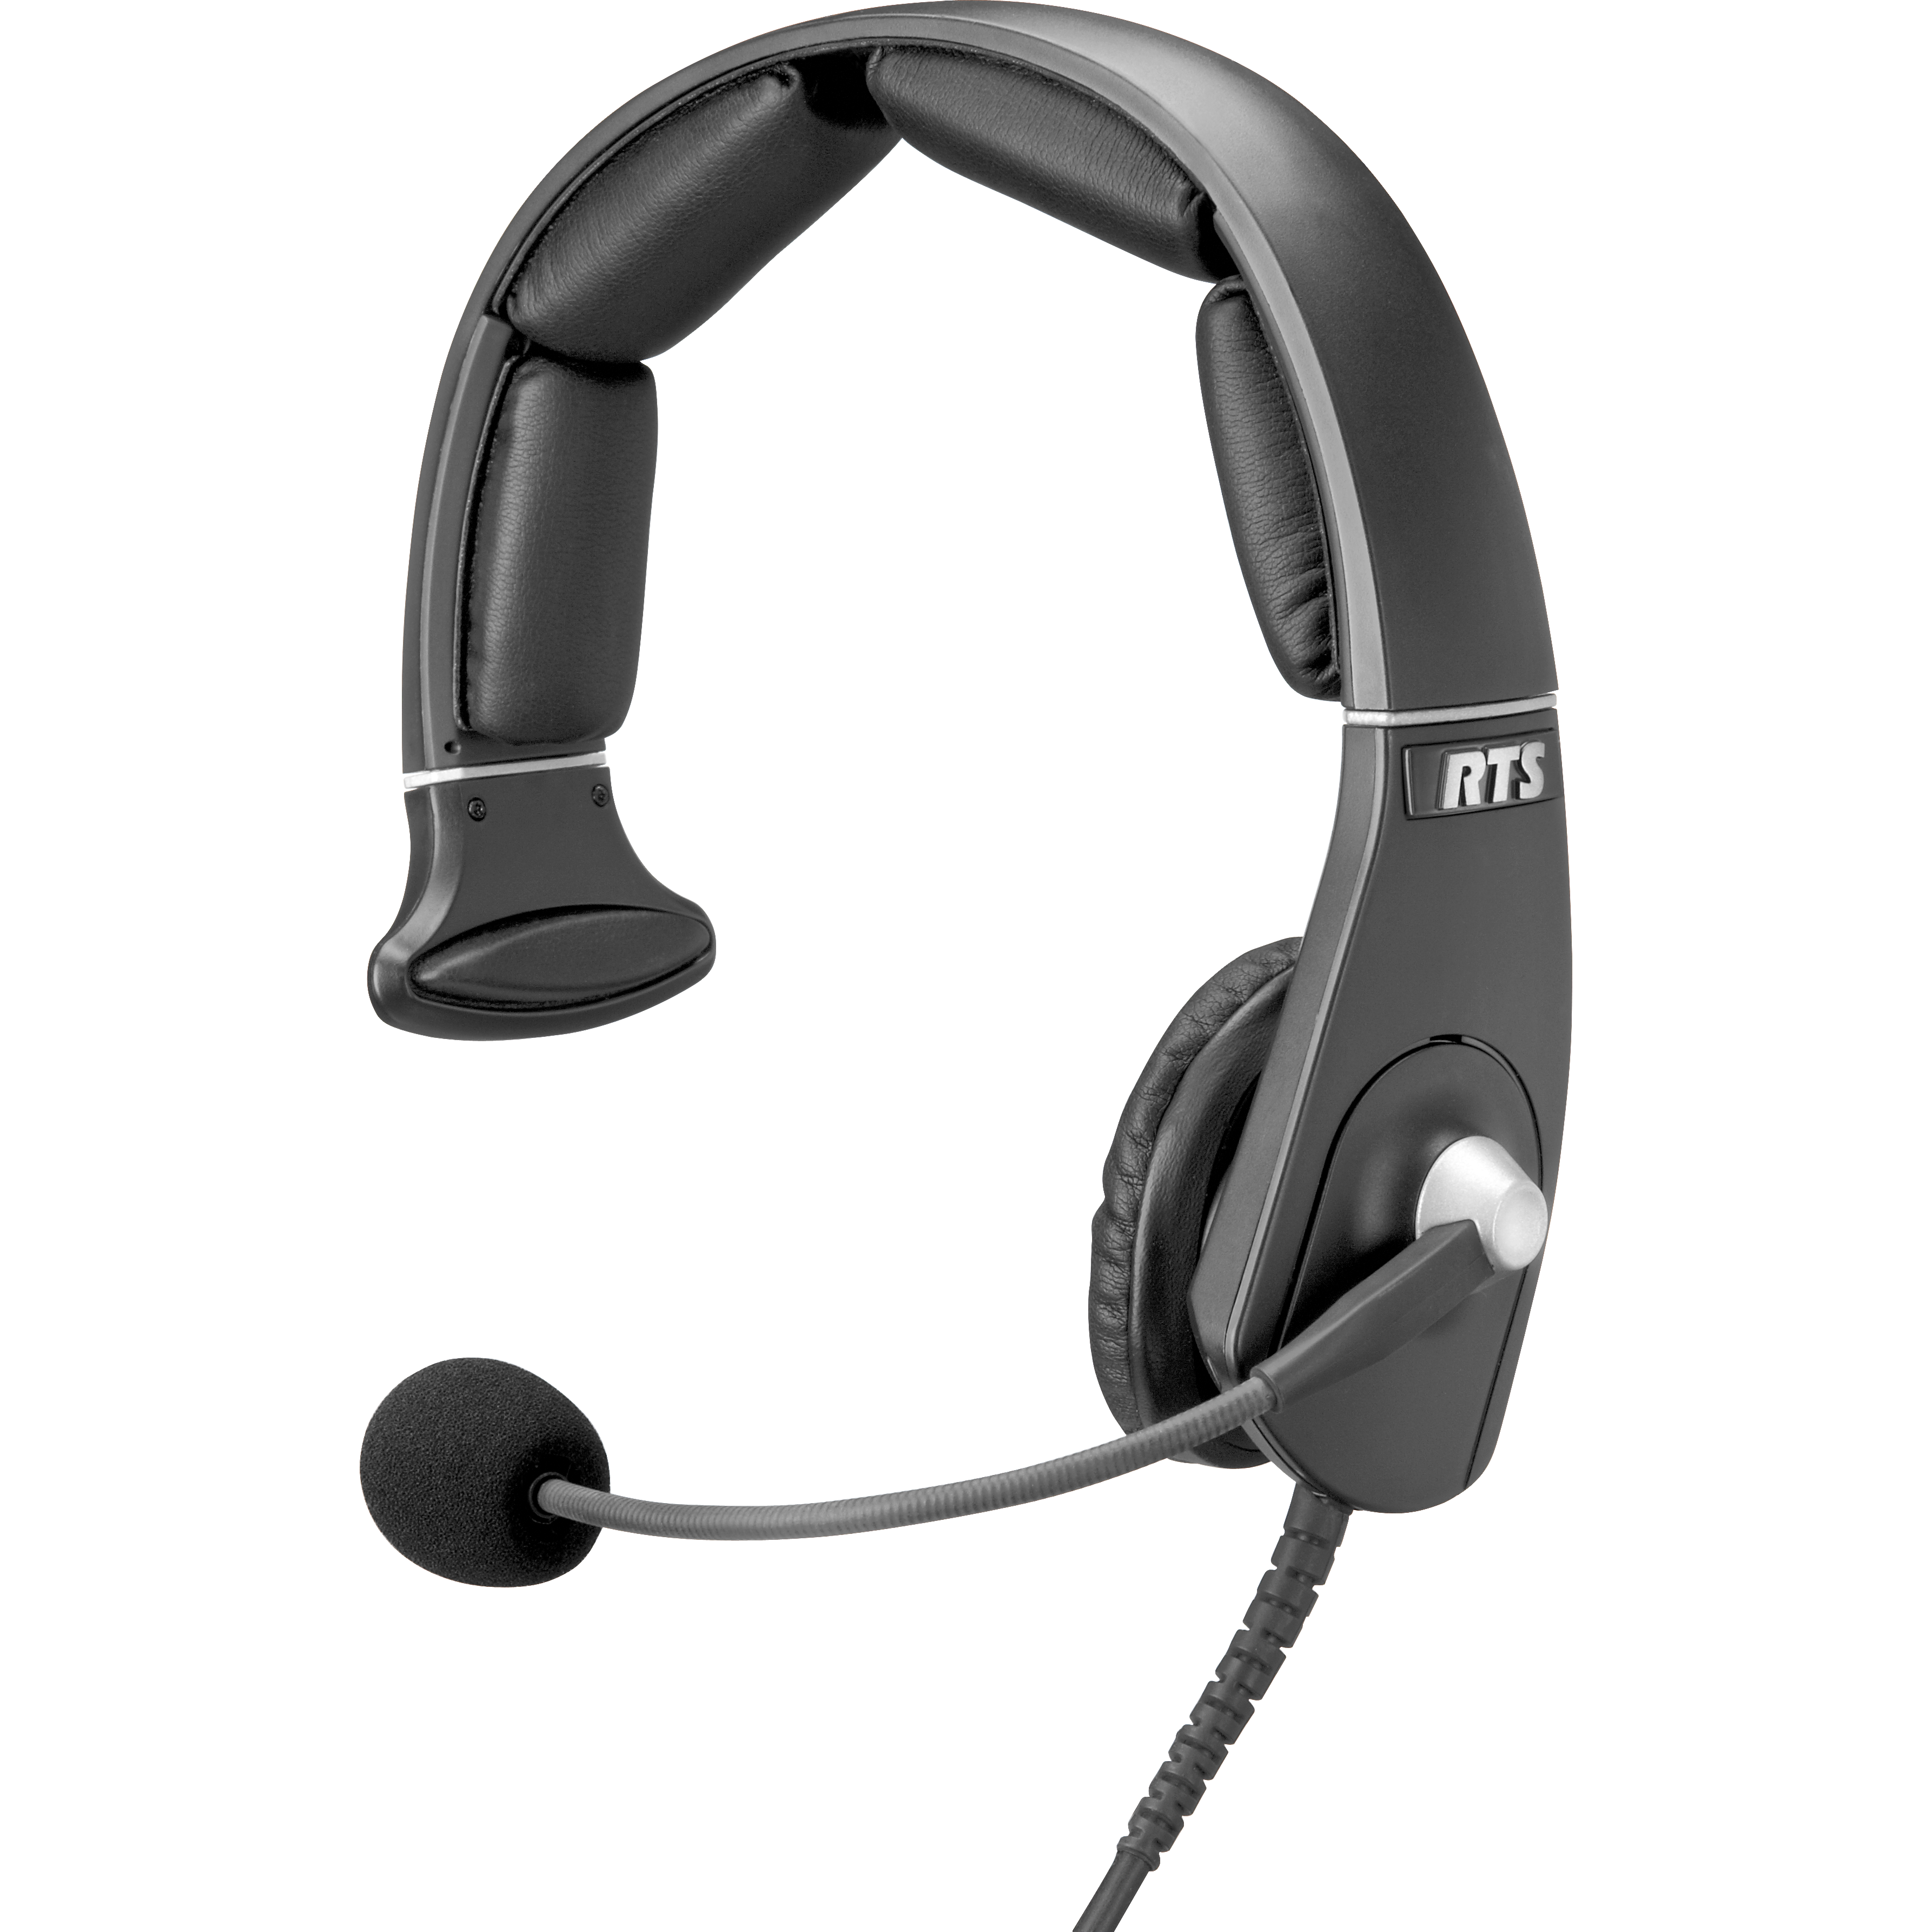 Headset PNG HD Image